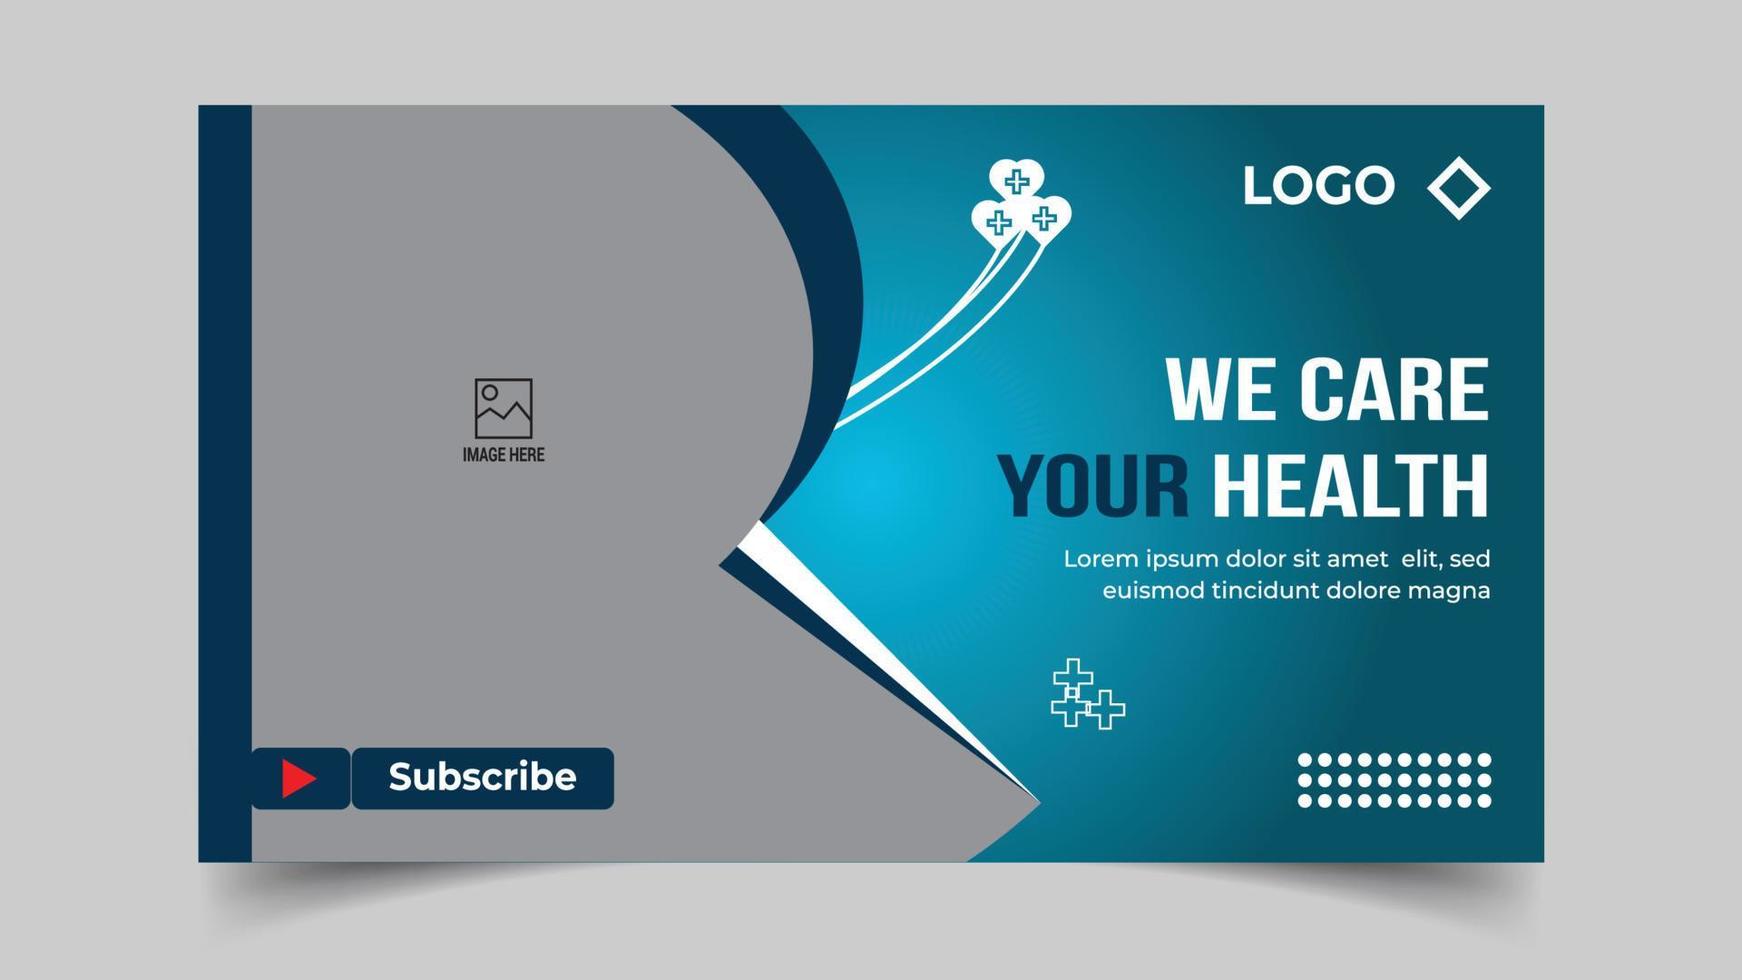 Editable Medical healthcare services provide or world health day youtube thumbnail and web banner template vector